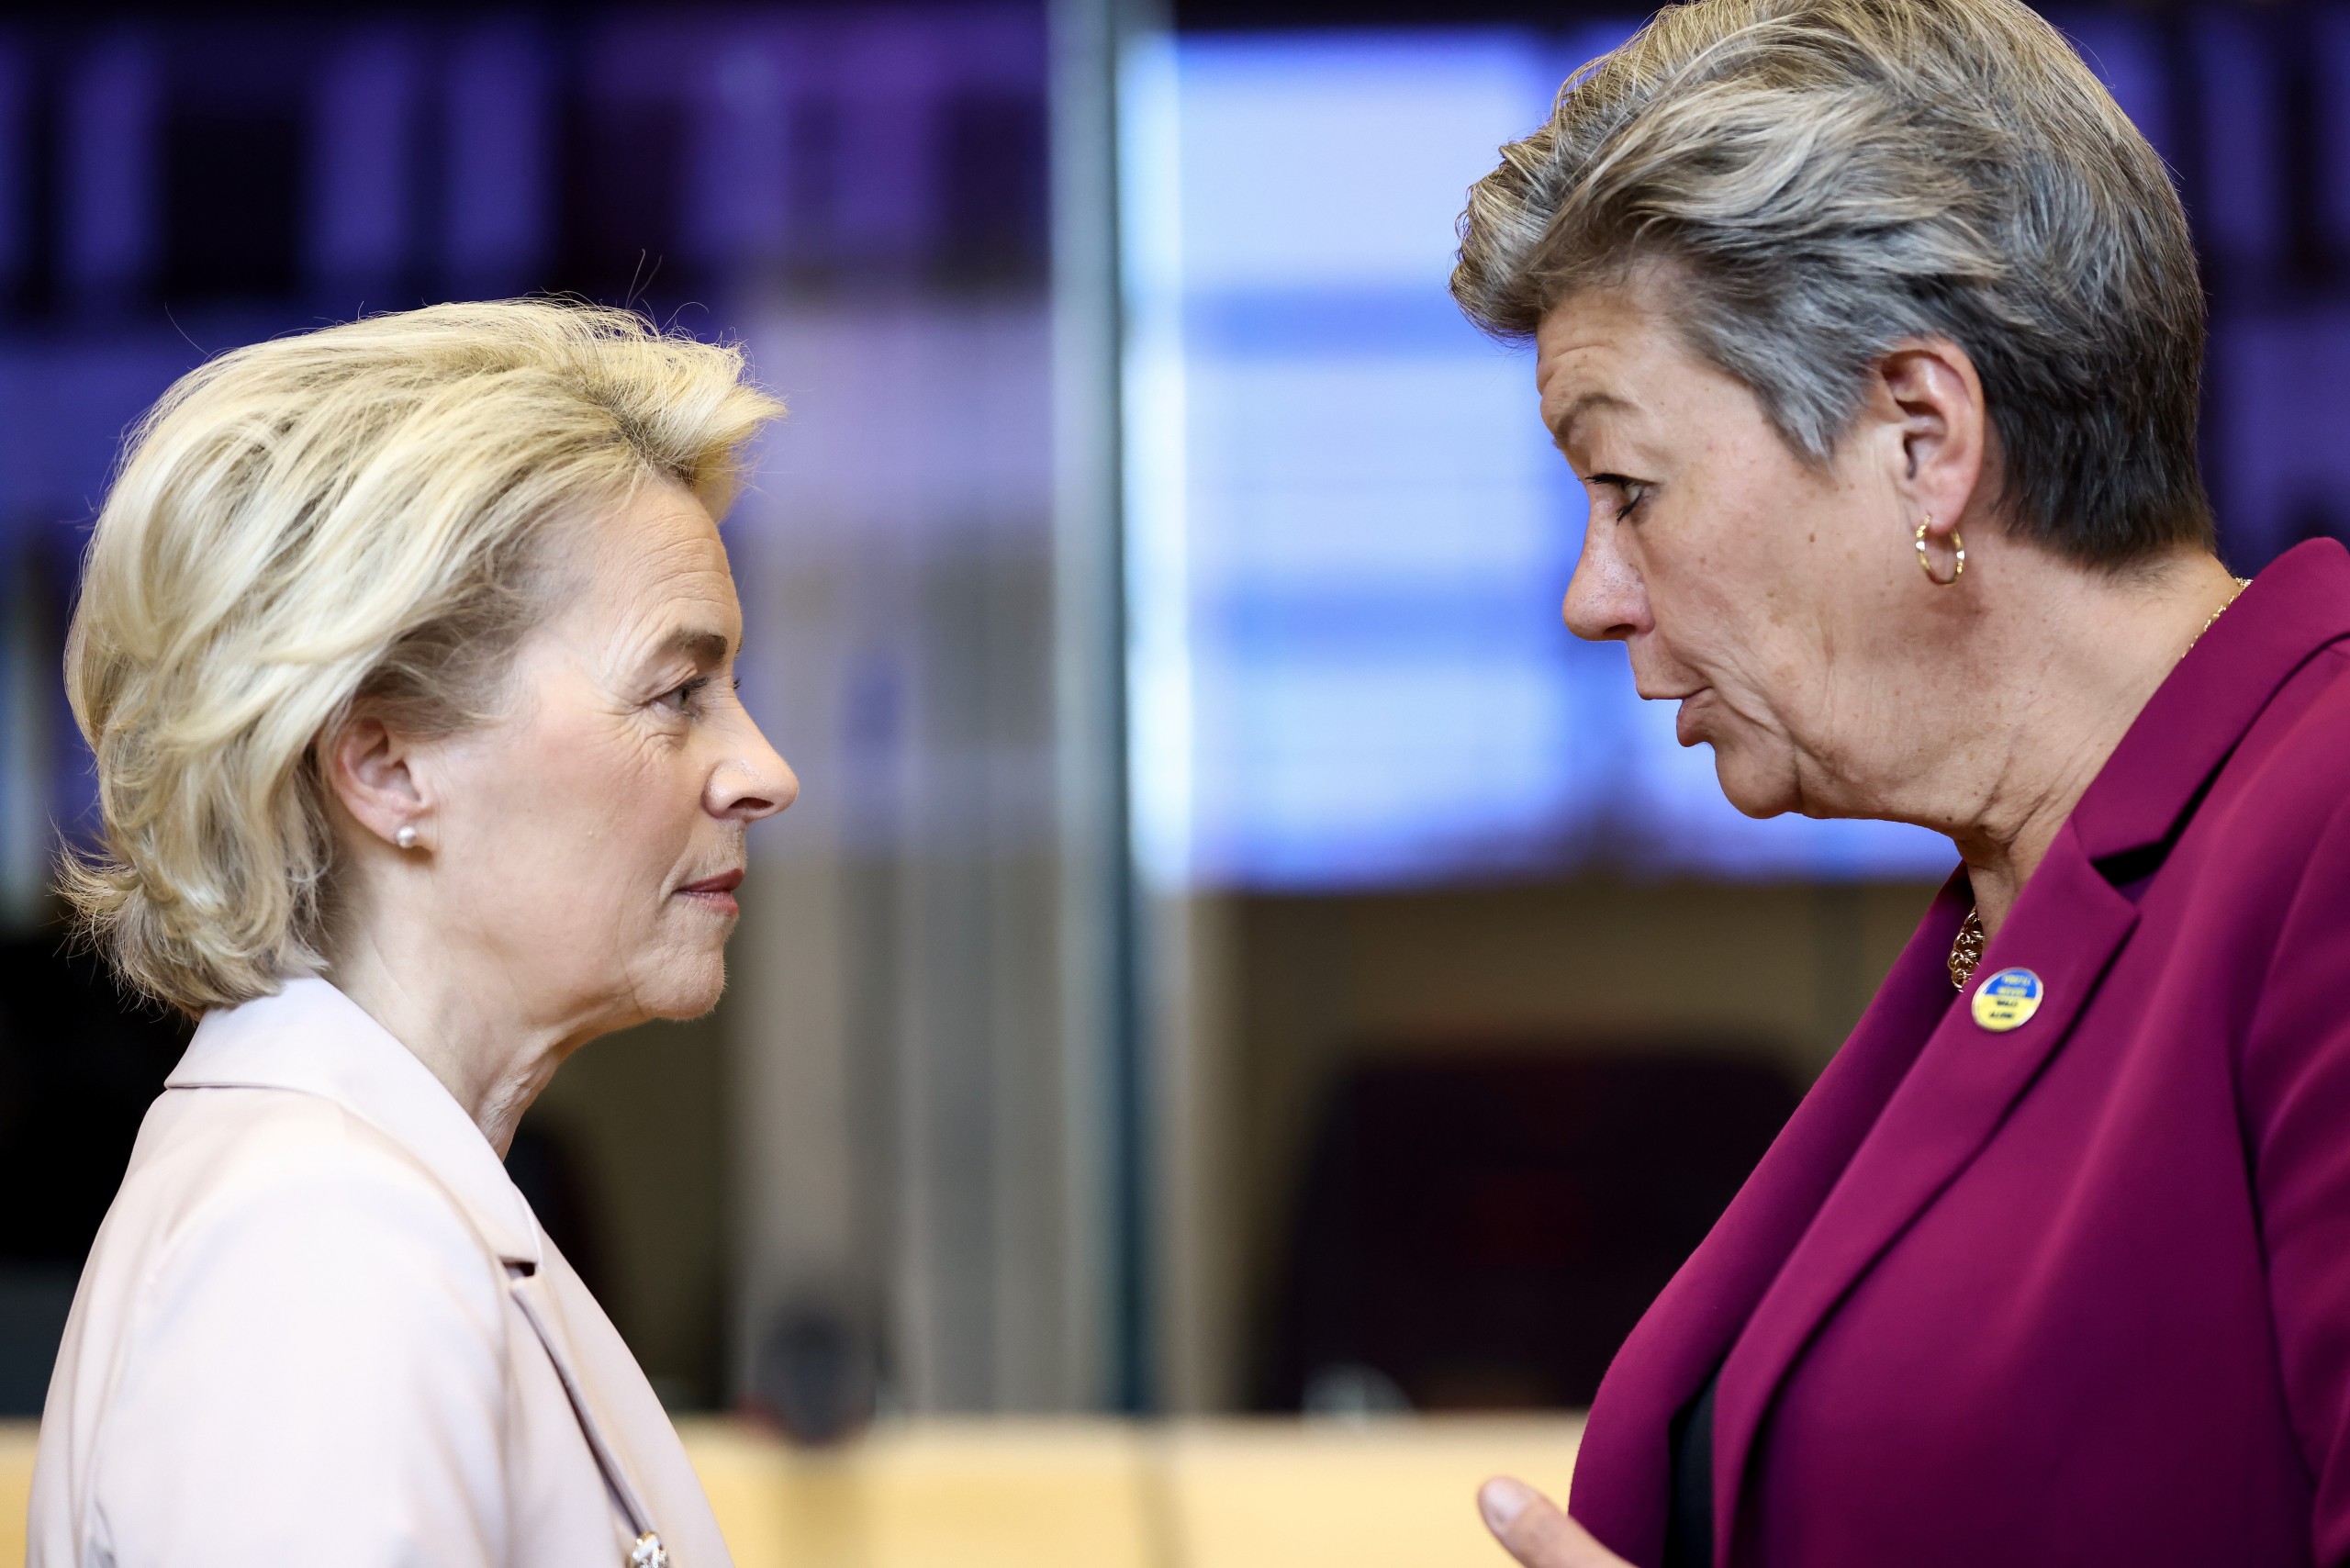 epa09911567 European Commission President Ursula von der Leyen (L) speaks with European Commissioner for Home Affairs Ylva Johansson (R) as she arrives for the European Commission weekly College Meeting at the EU headquarters in Brussels, Belgium, 27 April 2022.  EPA/KENZO TRIBOUILLARD / POOL